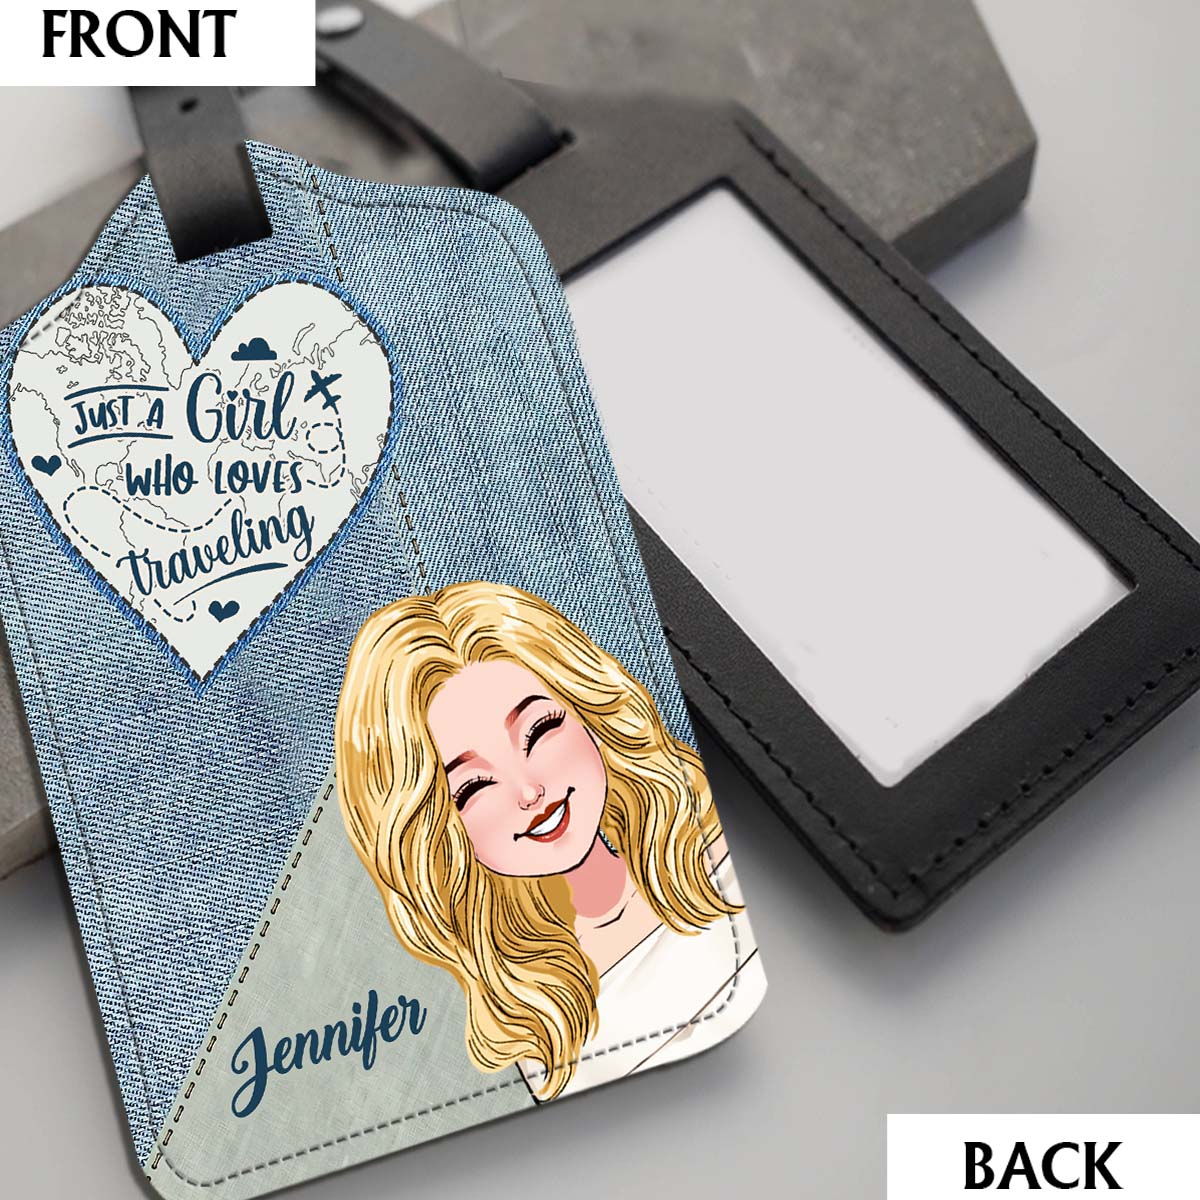 Just A Girl Who Loves Traveling - Personalized Travelling Leather Luggage Tag & Passport Holder